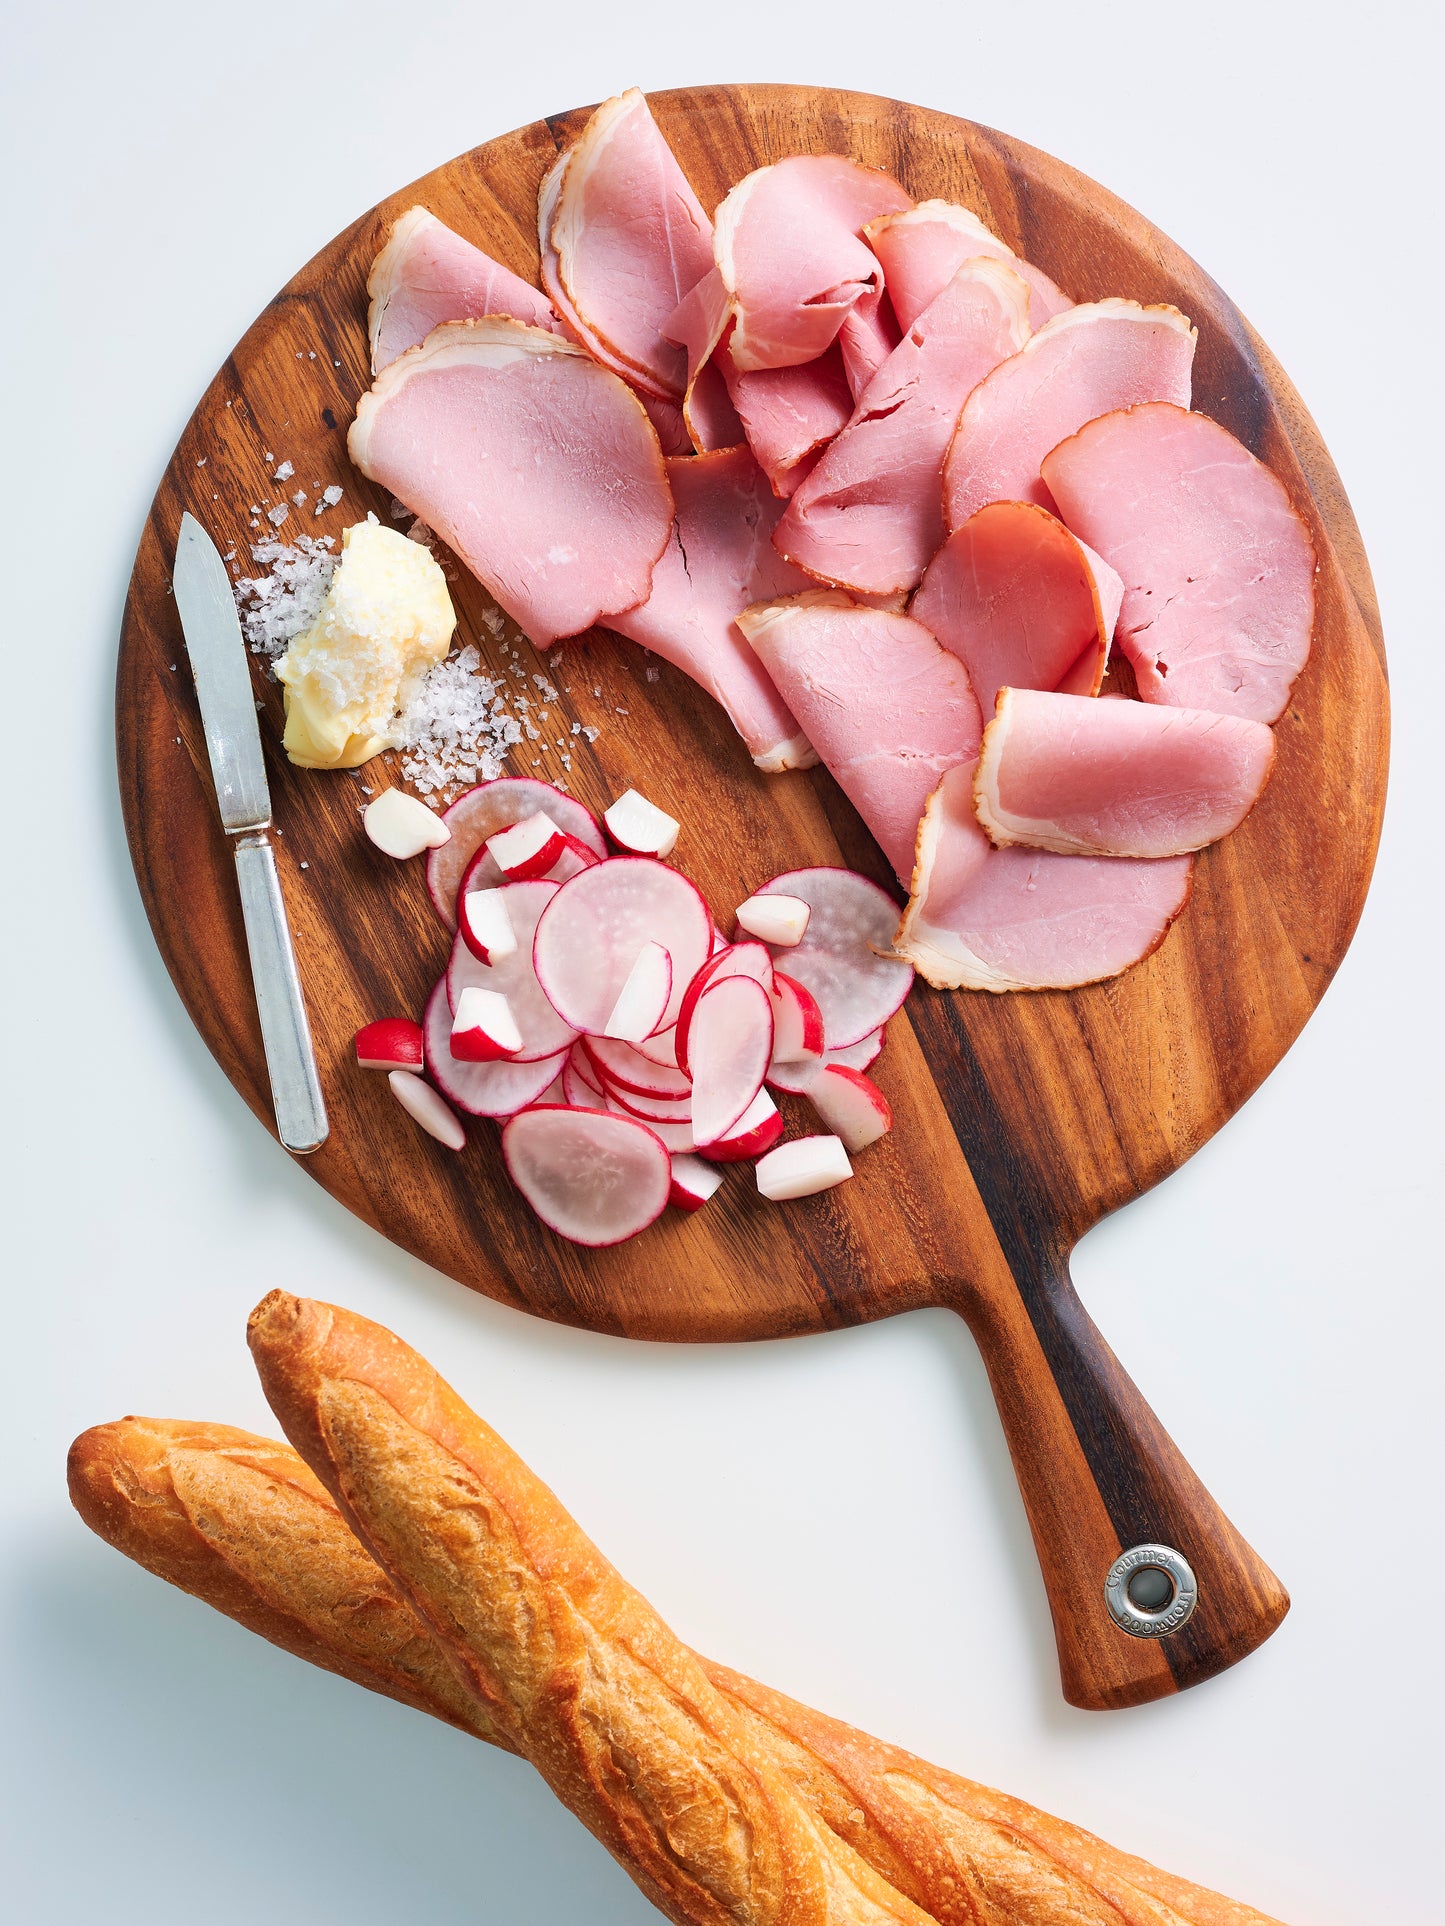 silced ham with radish and butter